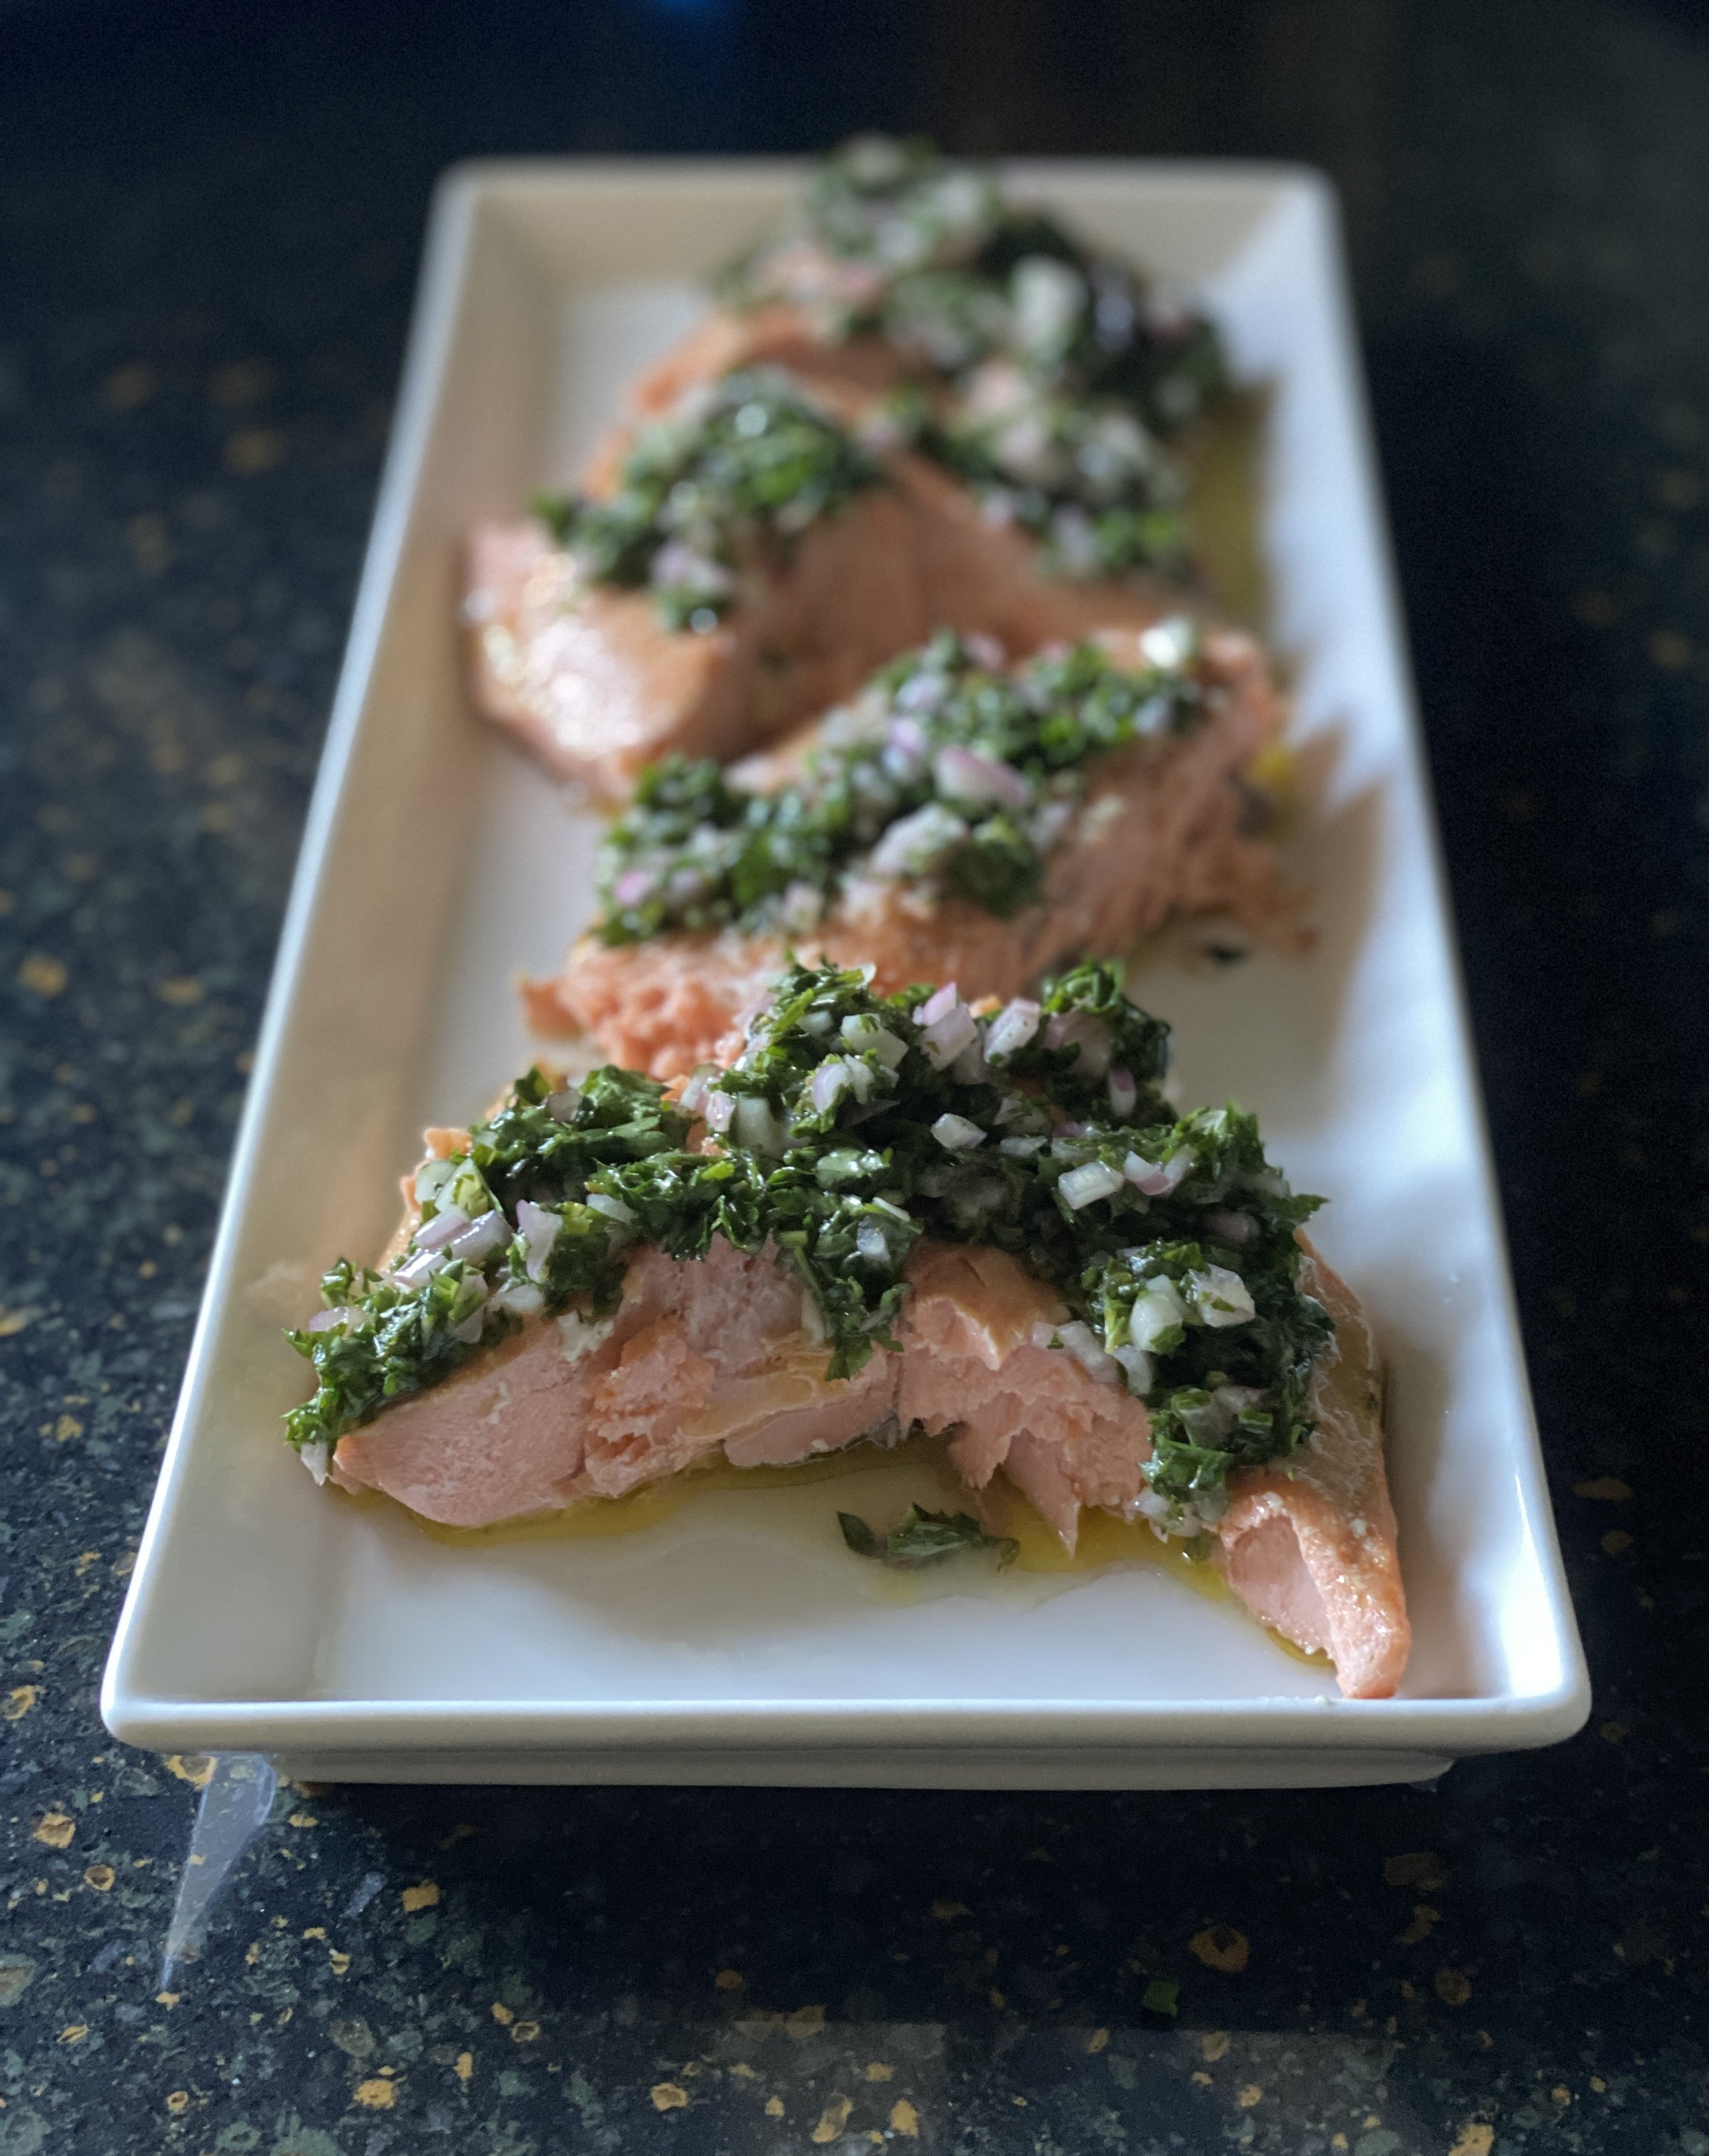 SLOW ROASTED SALMON WITH FRENCH HERB SALSA